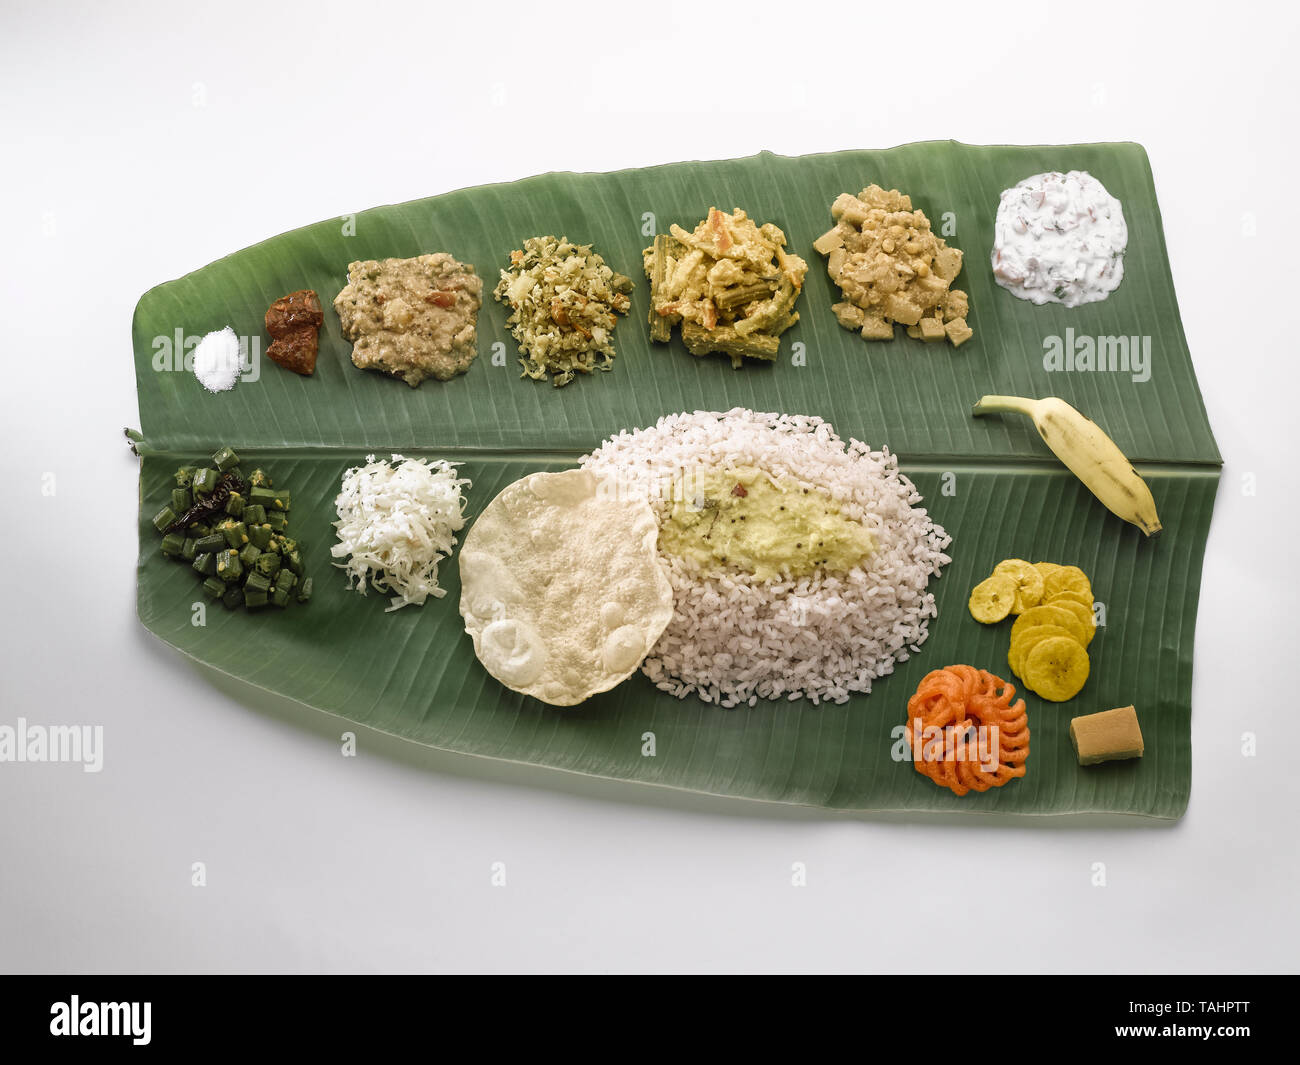 A STILL LIFE OF A TRADITIONAL TAMIL, SOUTH INDIAN ,  LUNCH SERVED ON A GREEN PLANTAIN LEAF. FROM TOP LEFT GOING RIGHT ARE-SALT; MANGO PICKLE; COCUNUT  Stock Photo